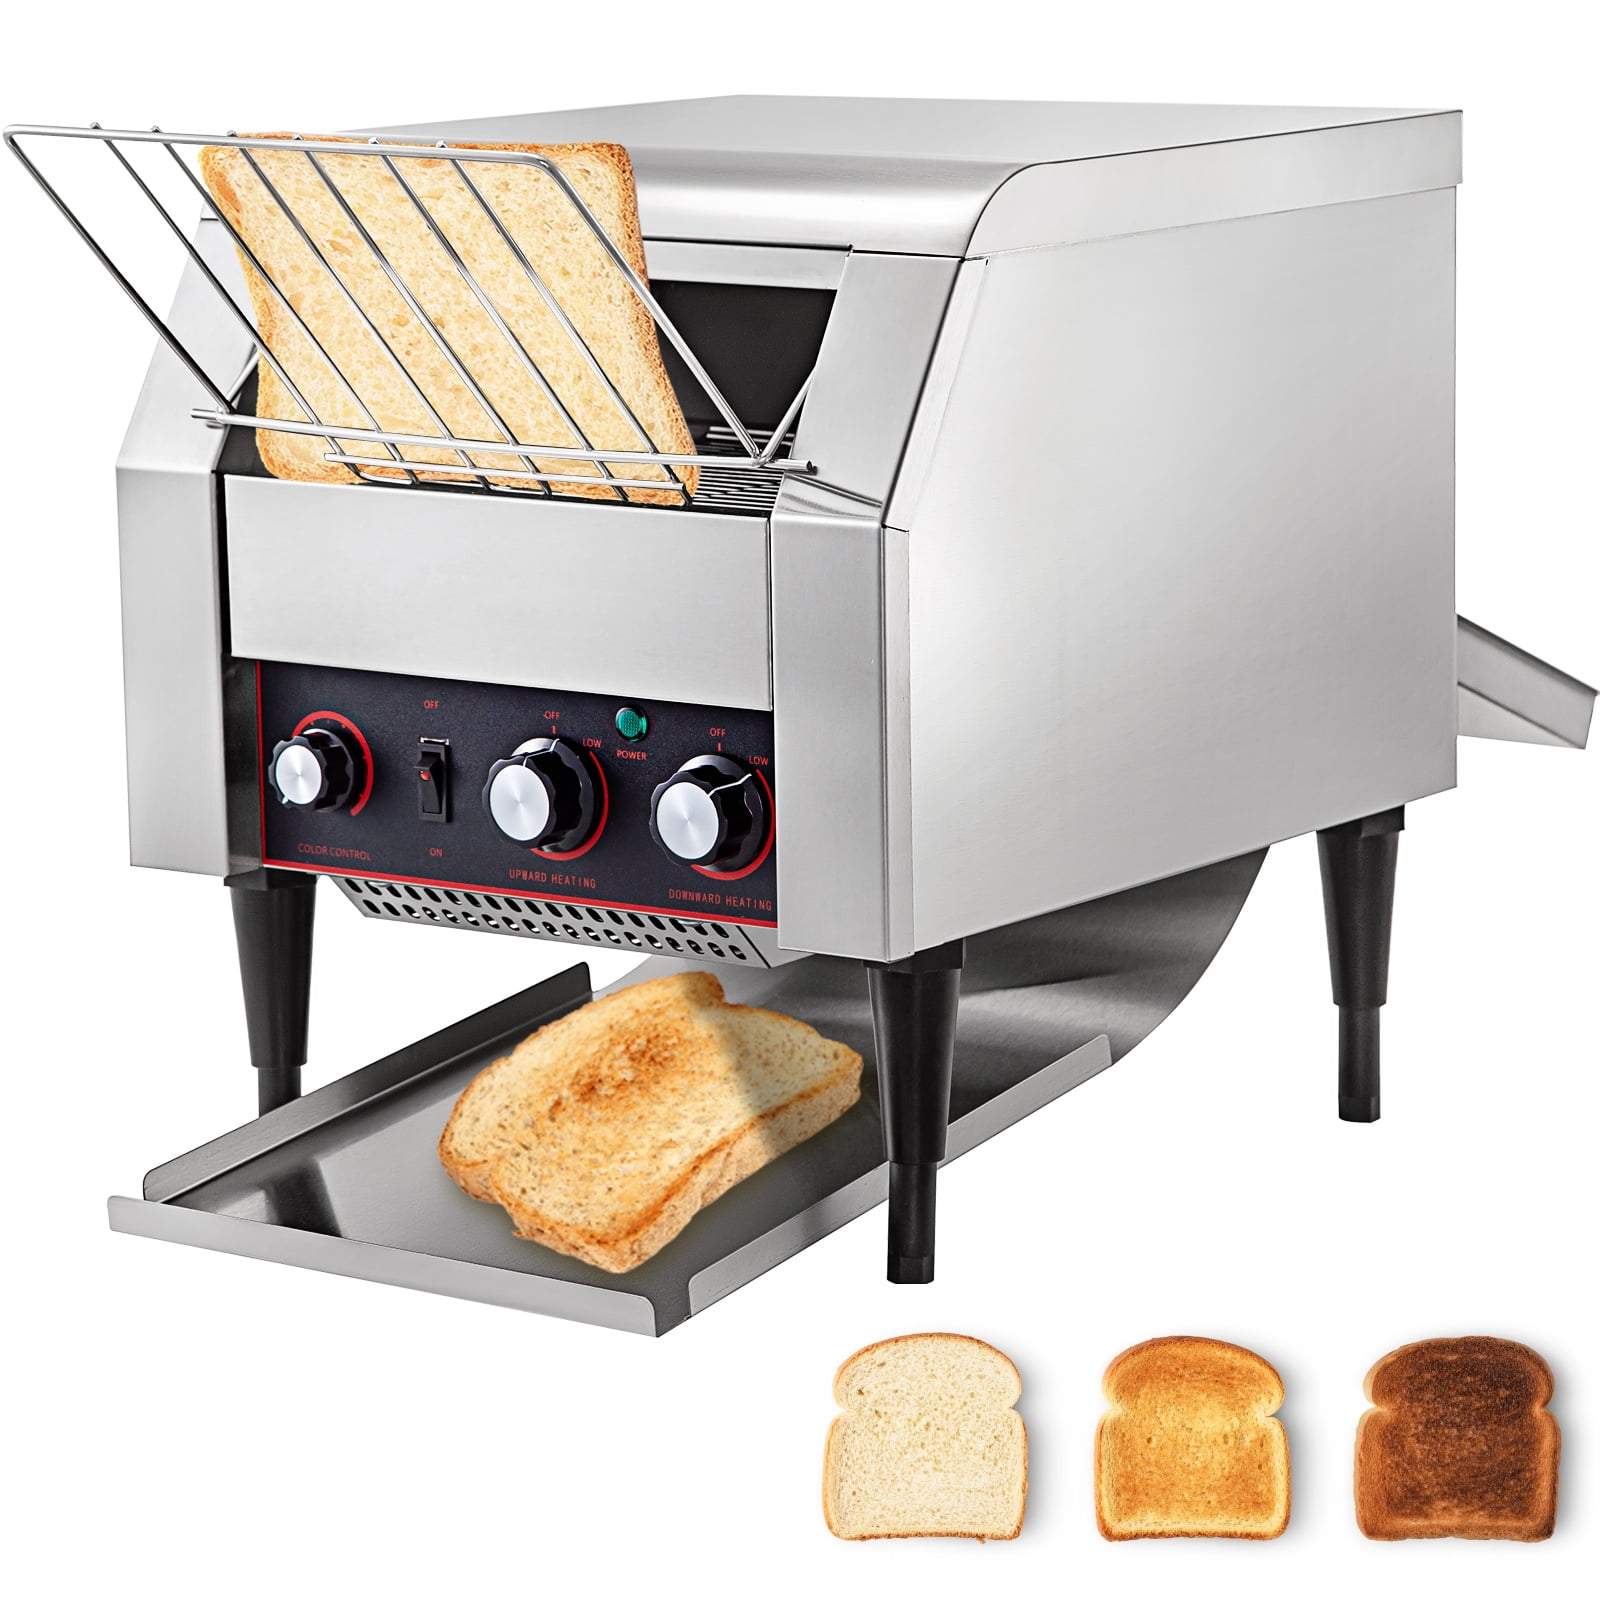 Commercial Toaster Conveyor Restaurant Toaster for Bun Bagel Roller Bread 150slices/h Heavy Duty Industrial Toasters Steamers Efficient Stainless Steel Toster Quality Belt Toaster Hotel Restaurants